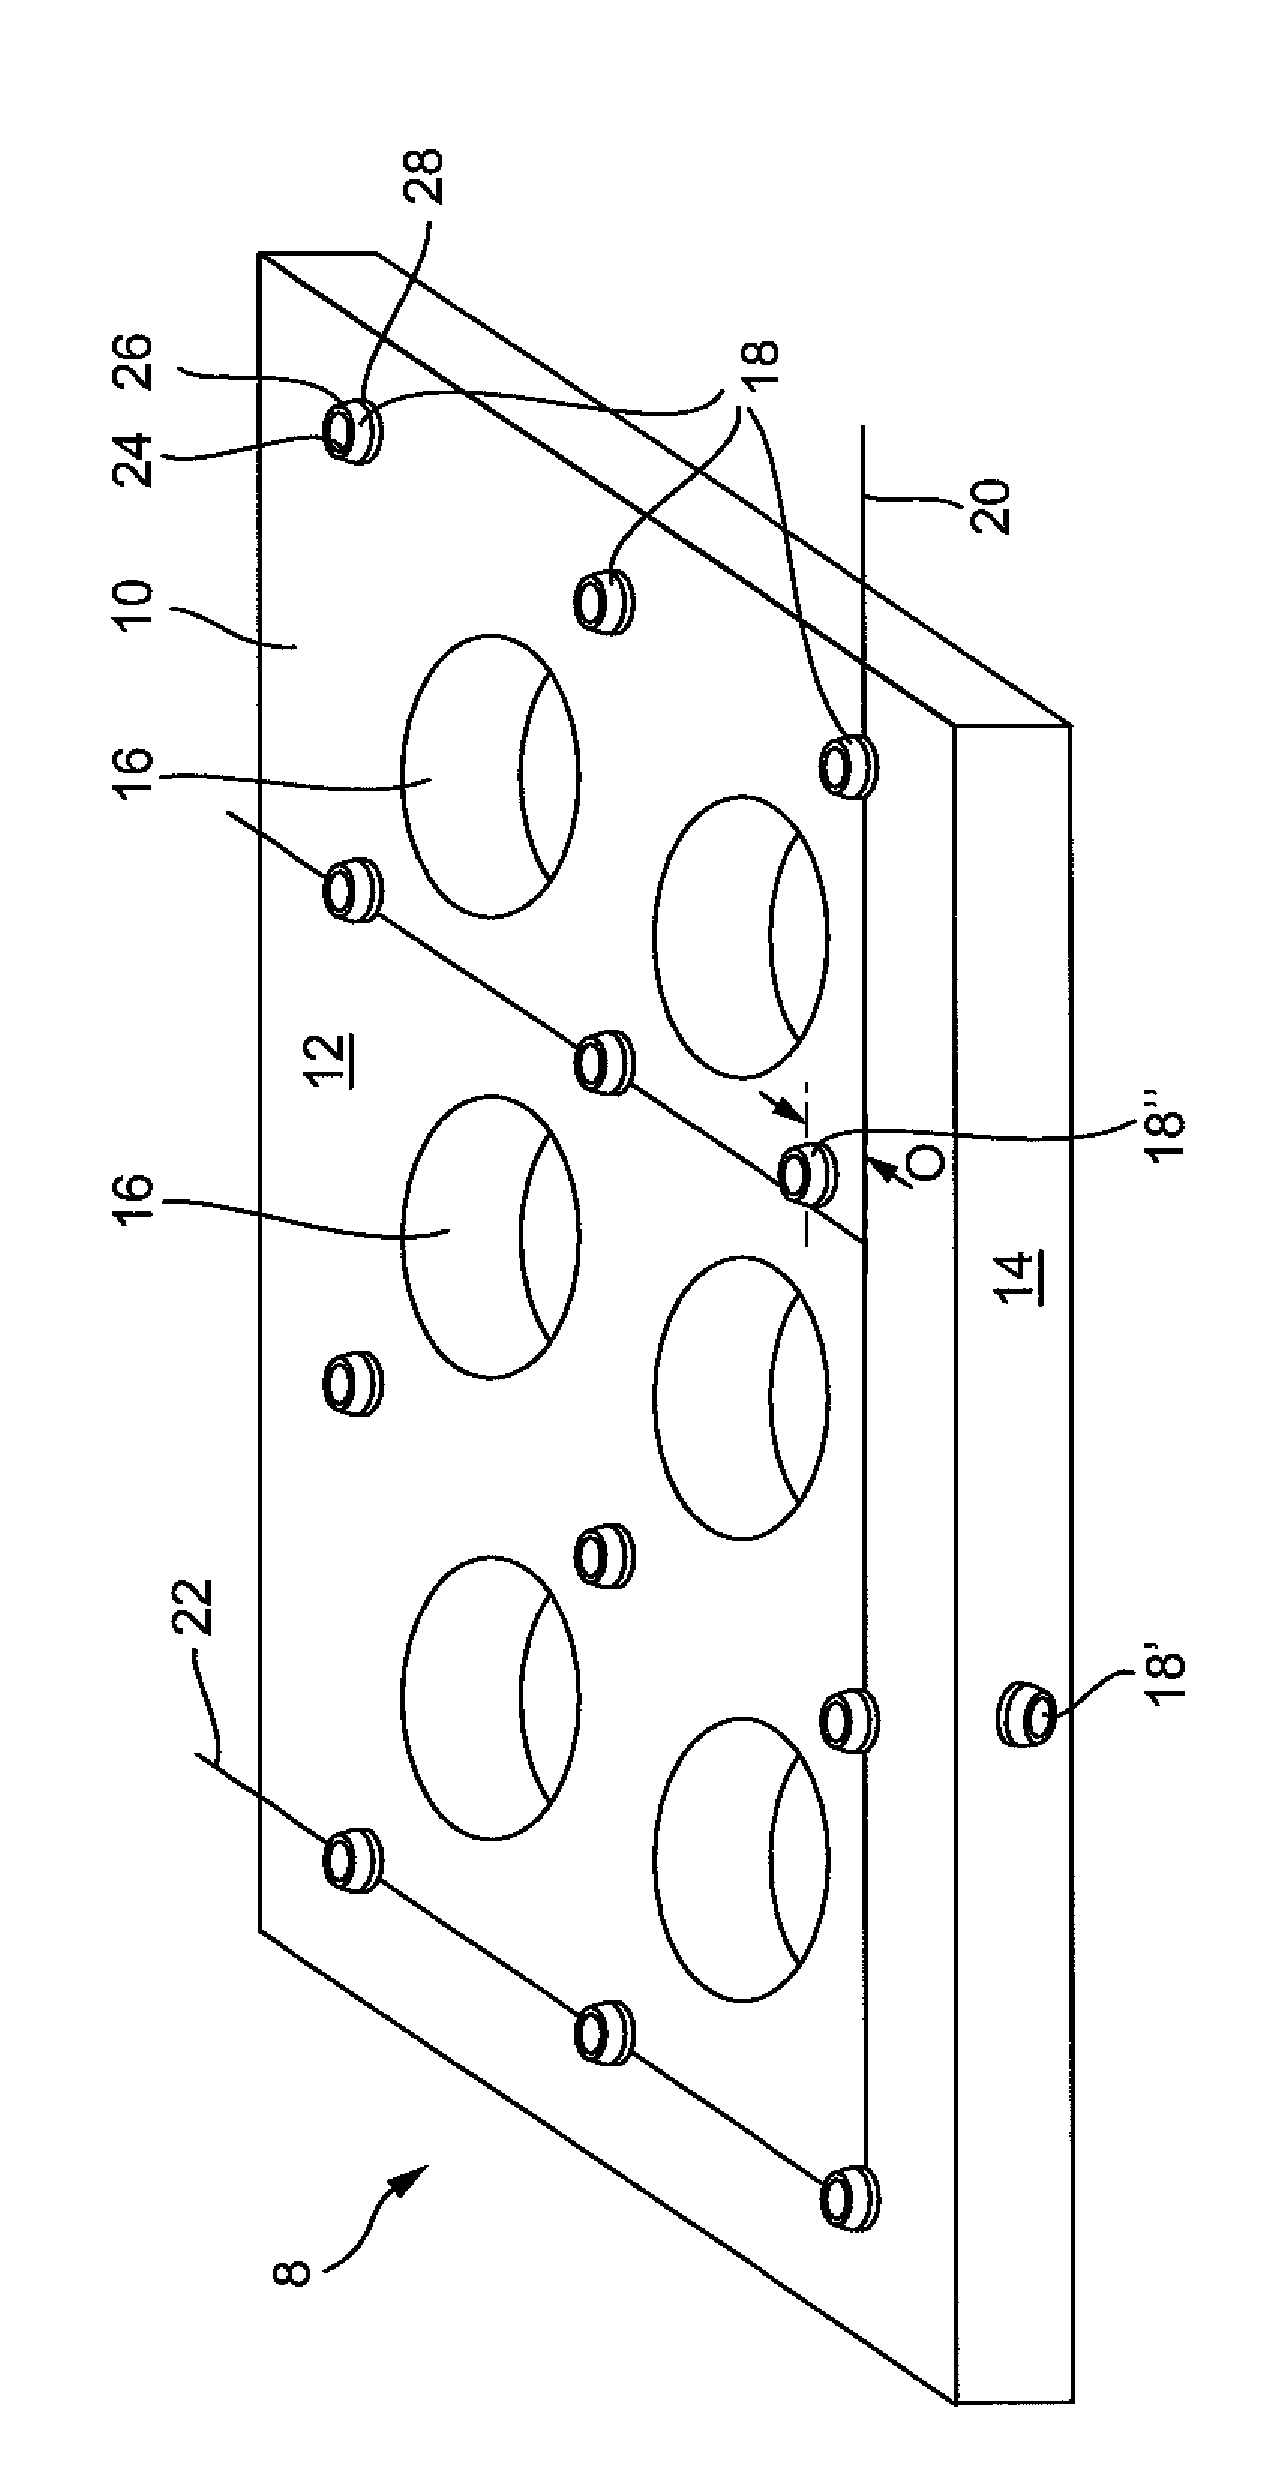 Apparatus for testing the accuracy of machine tools and measuring devices